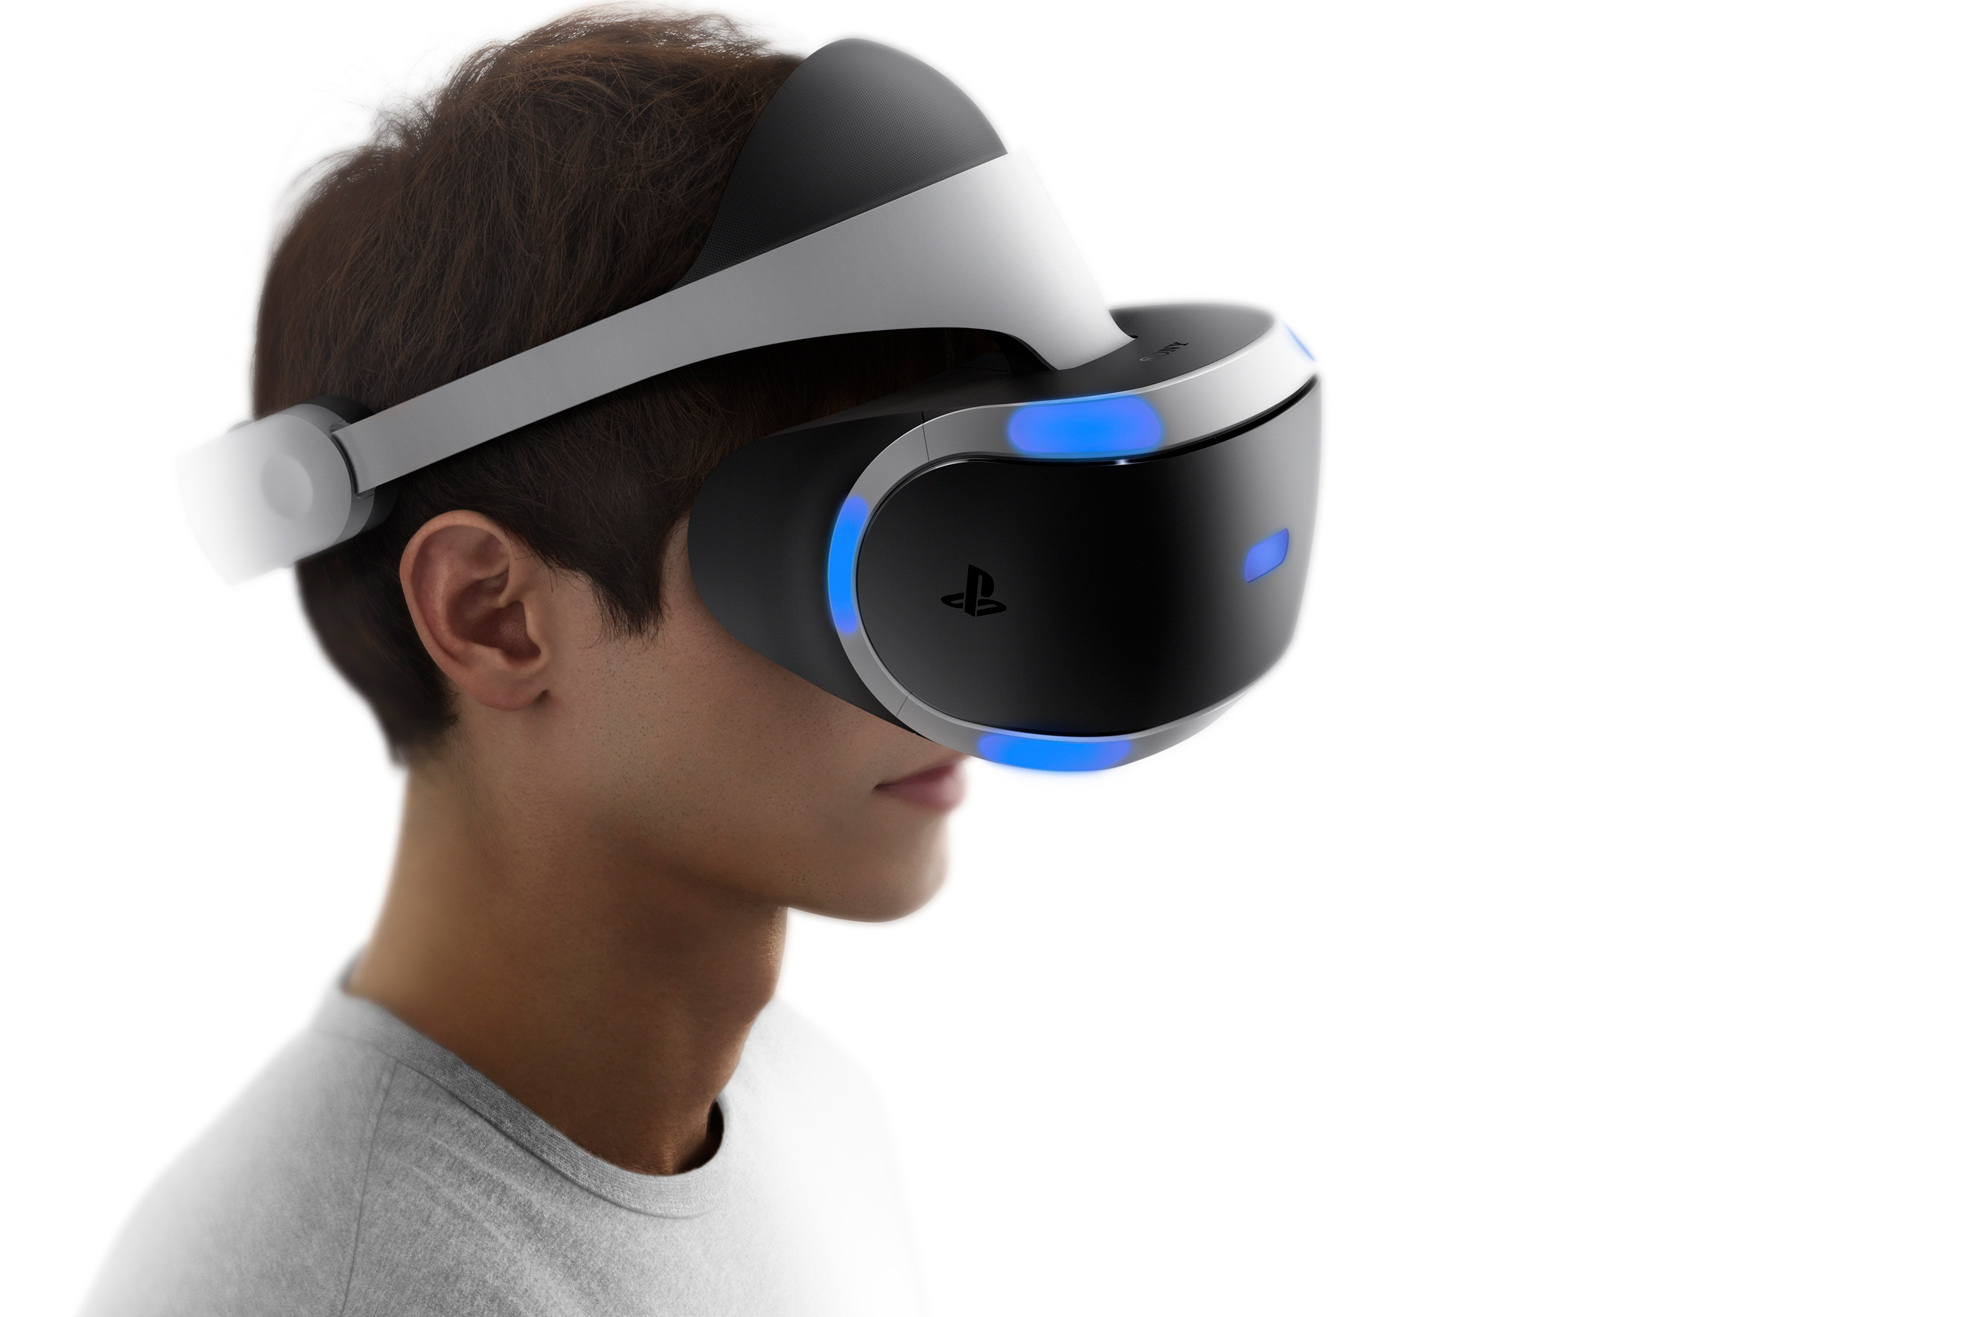 vr headset console